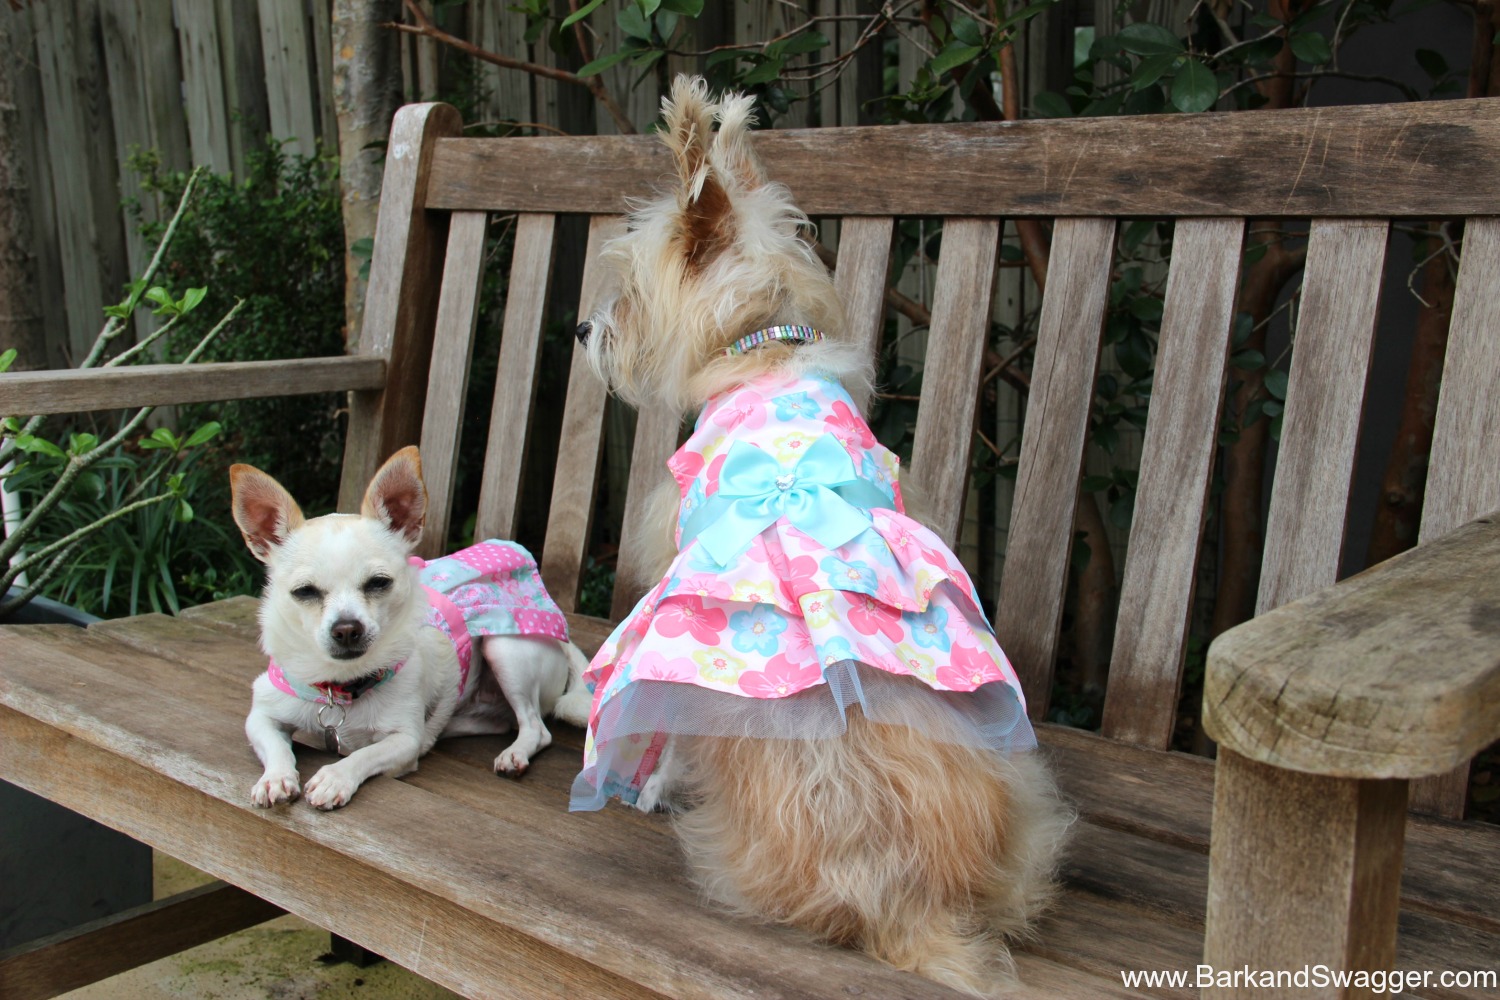 The history of Easter fashion trends and some adorable doggy styles.